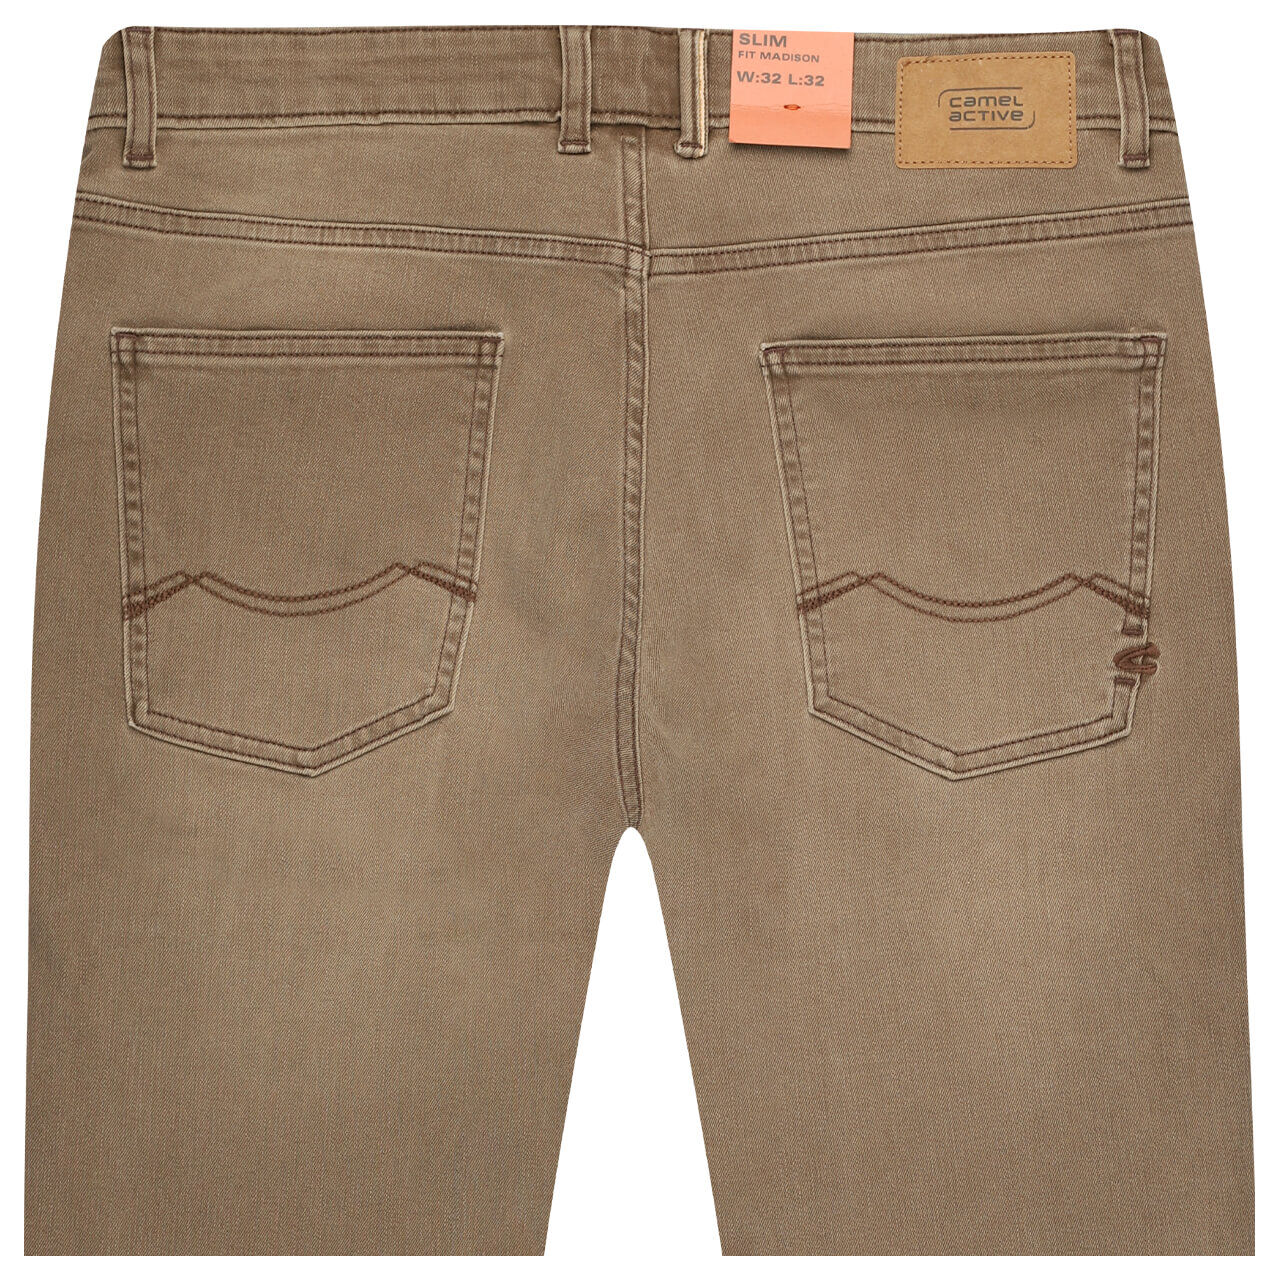 Camel active Madison Jeans light brown